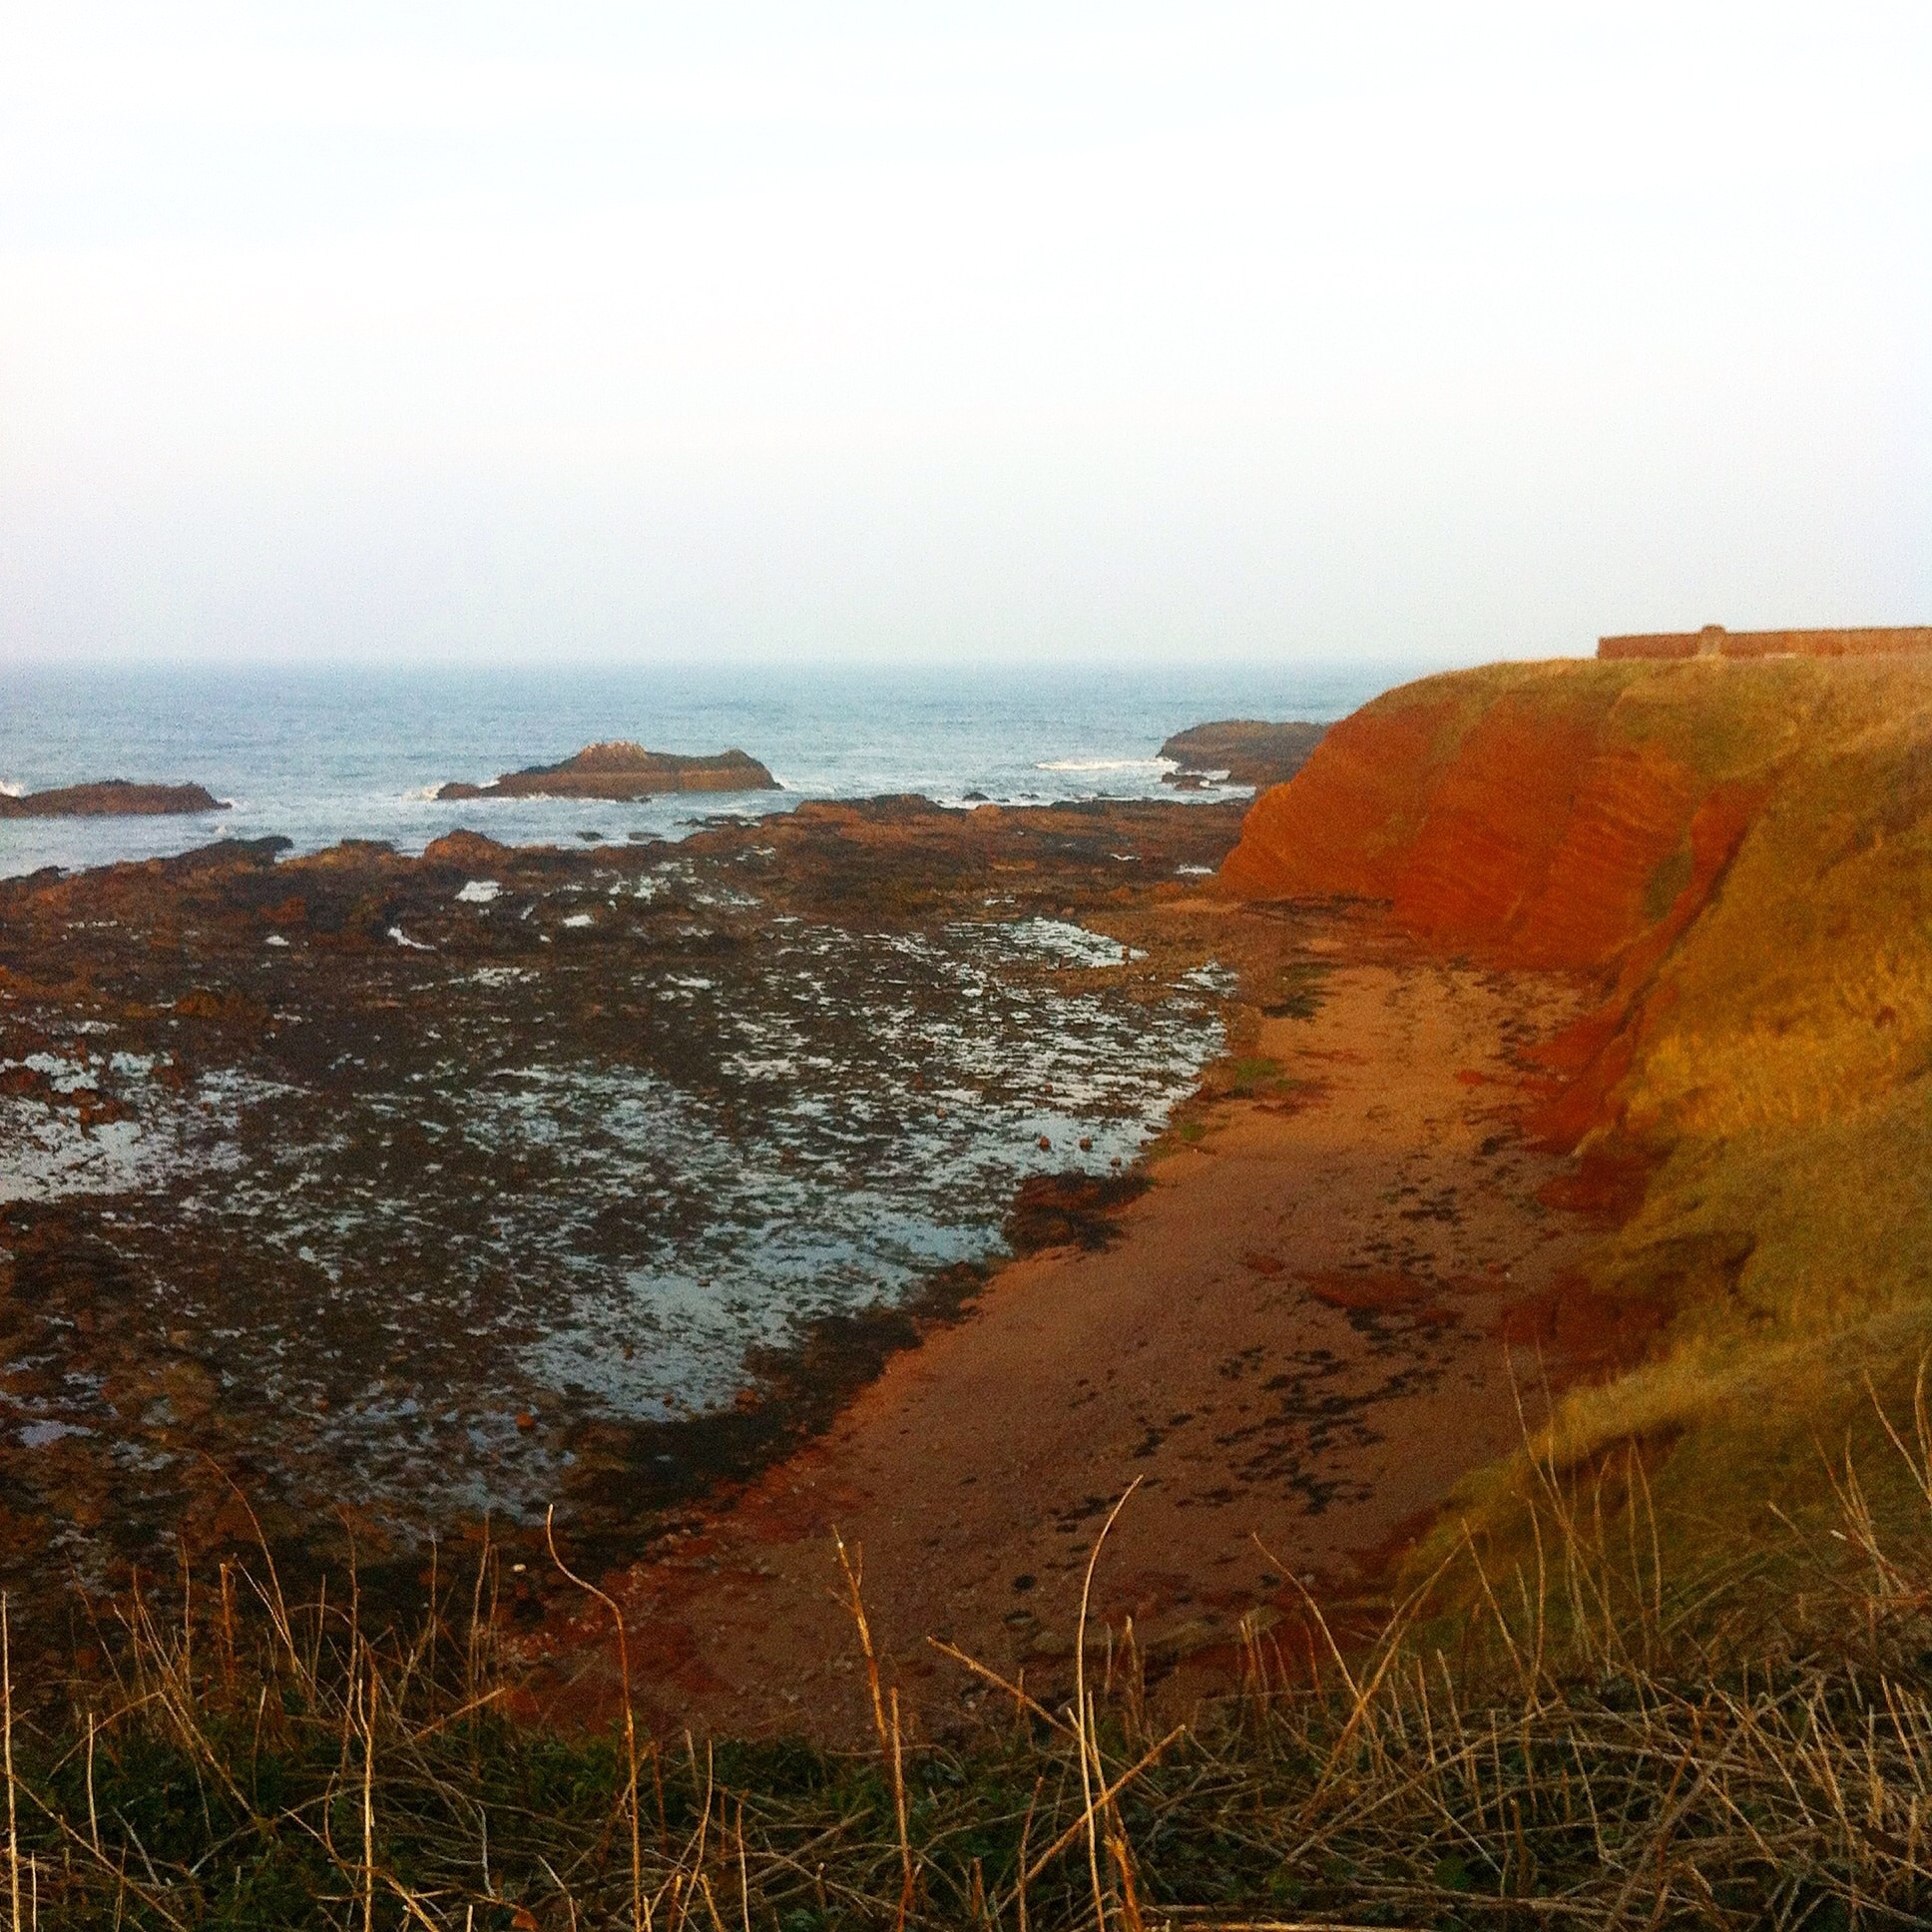 Winterfield golf course at Belhaven Bay is in the most stunning location! Great walks and a few nice pubs in Dunbar. Only 45 minutes from Edinburgh.